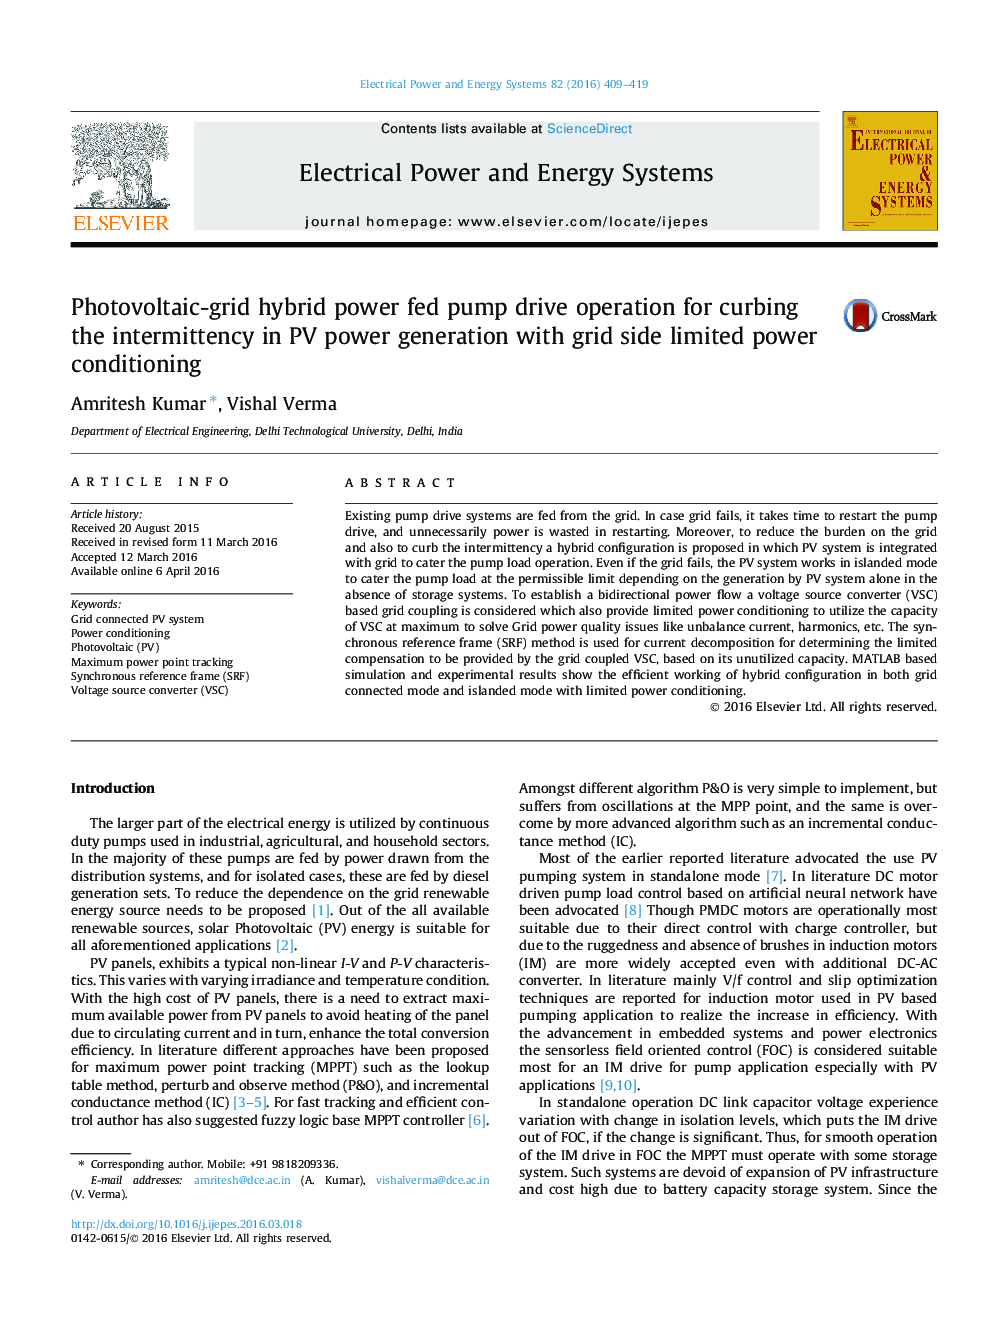 Photovoltaic-grid hybrid power fed pump drive operation for curbing the intermittency in PV power generation with grid side limited power conditioning